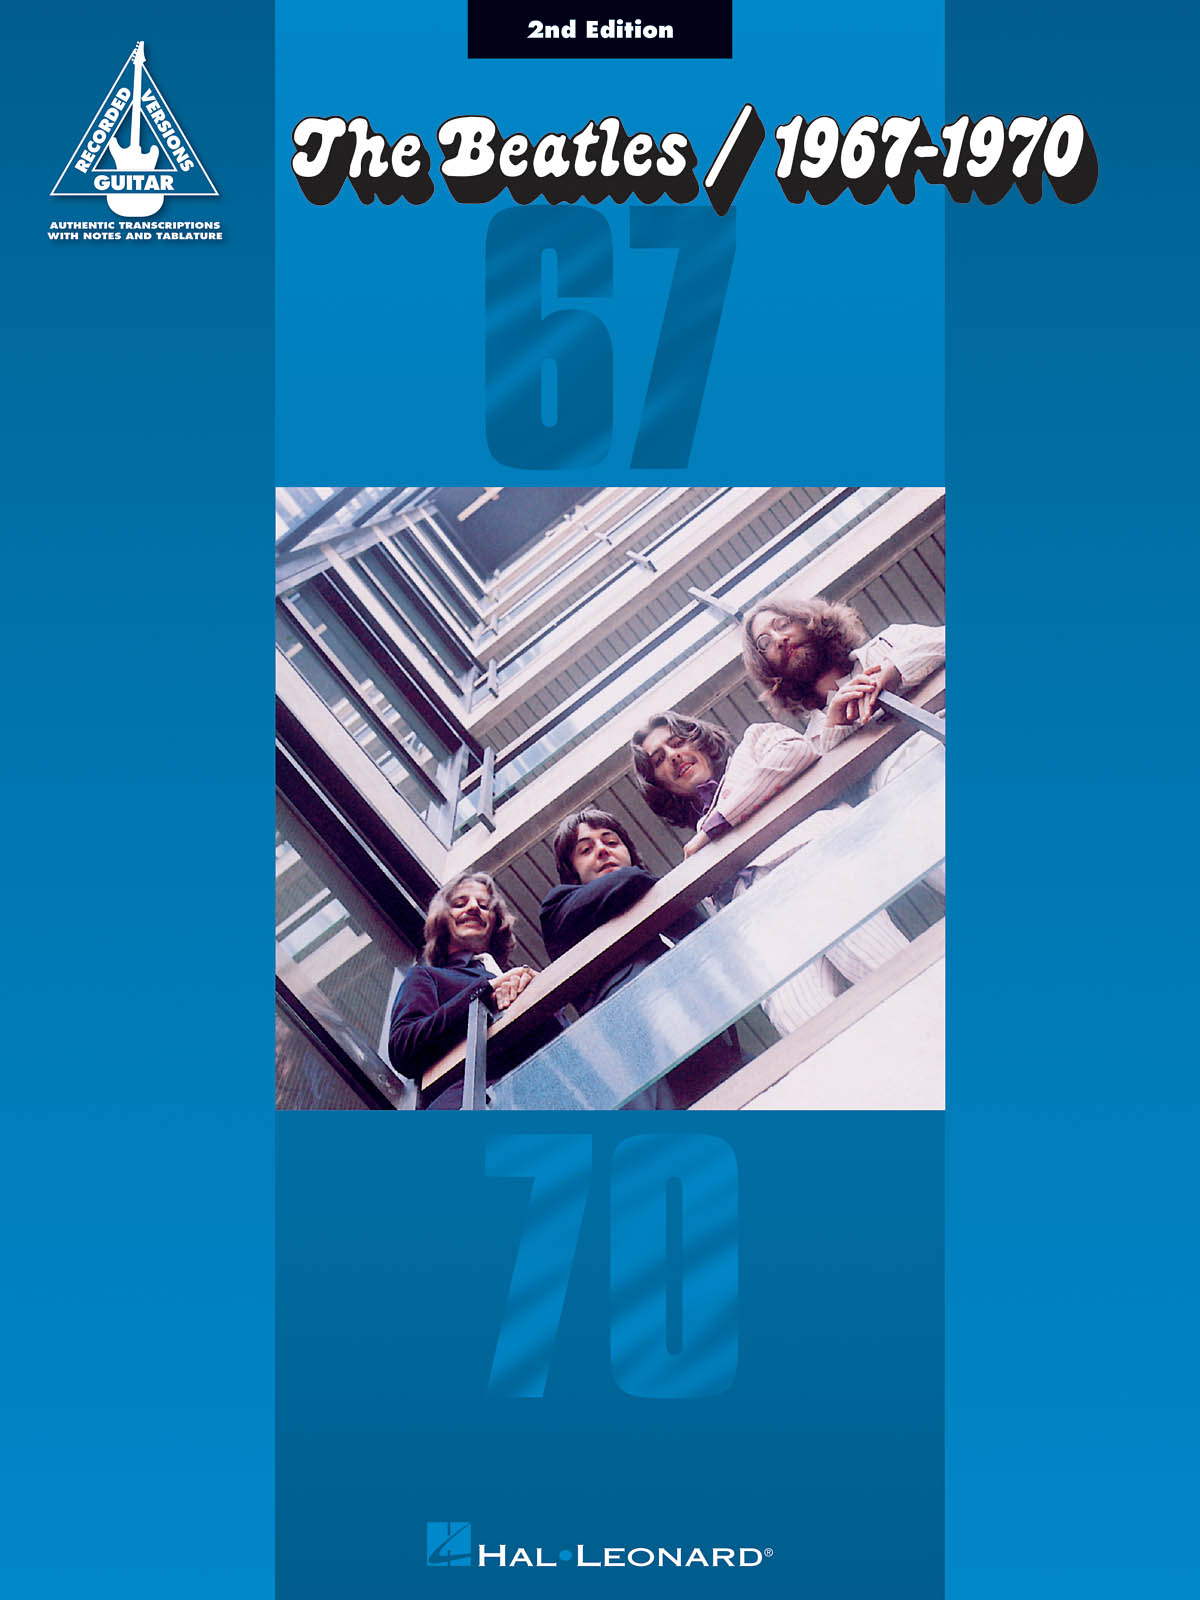 The Beatles: The Beatles - 1967-1970 - 2nd Edition: Guitar Solo: Artist Songbook